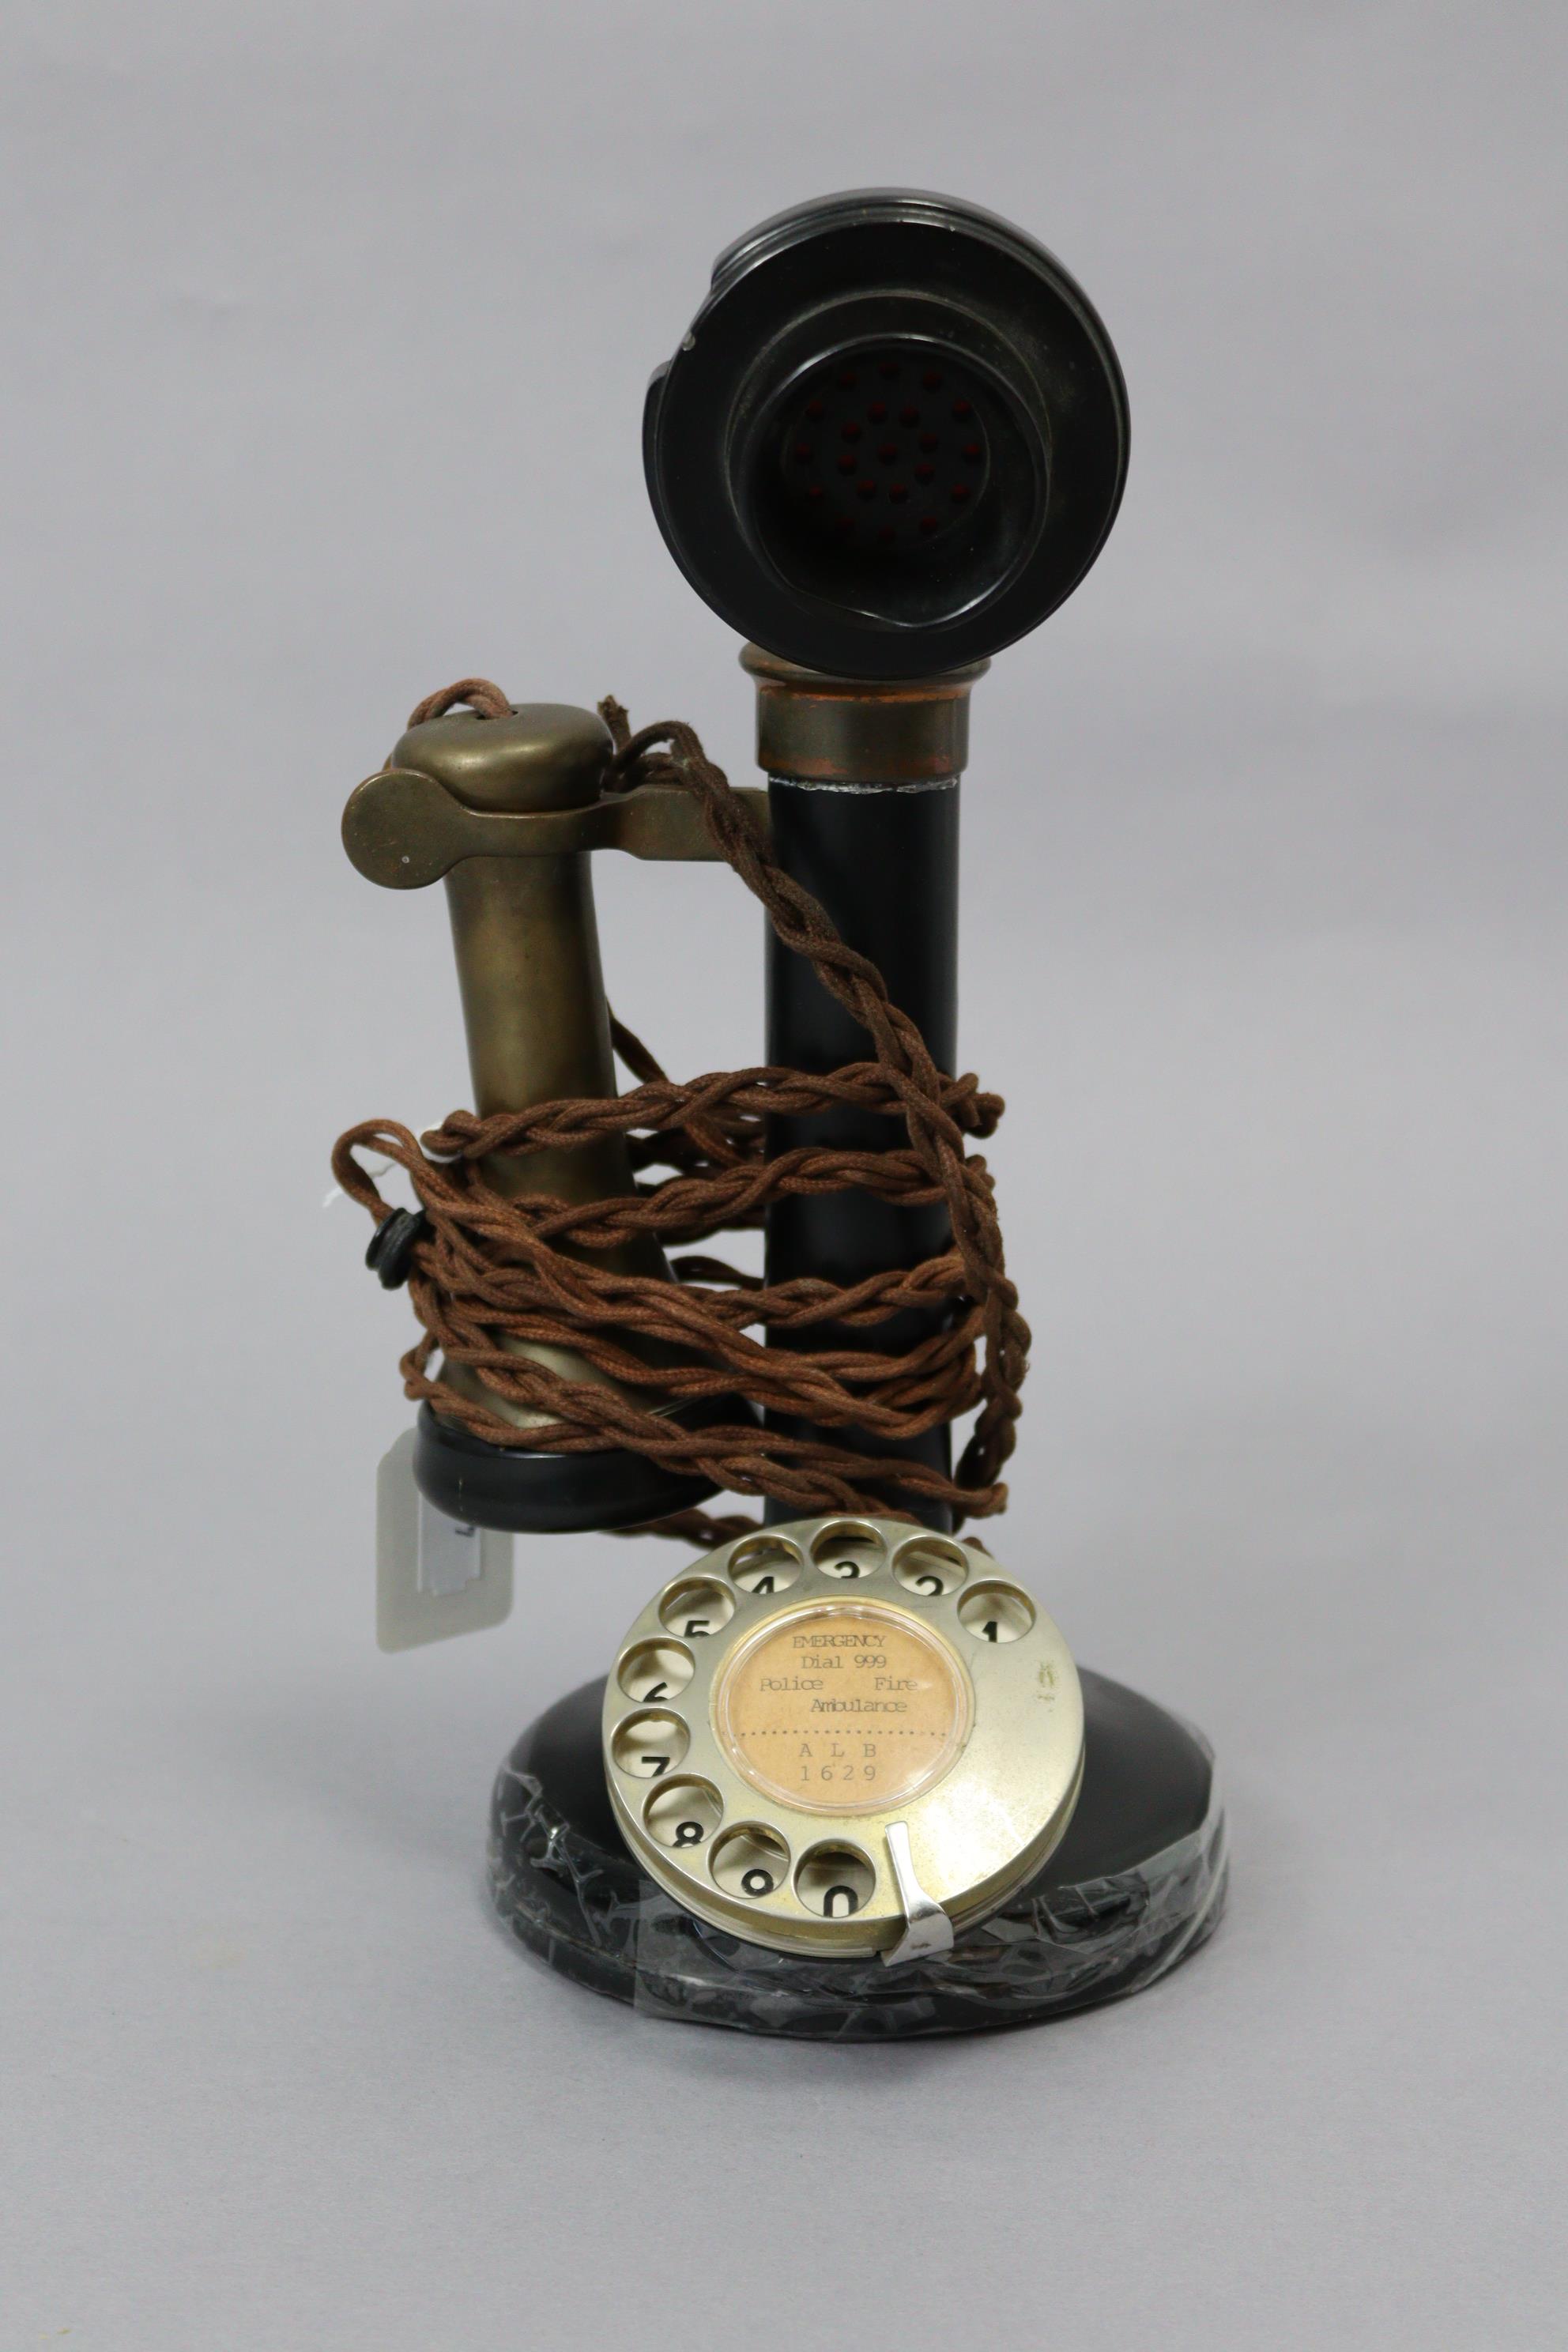 A mid-20th century candlestick telephone (Model No. 150), in black Bakelite case with brass & chrome - Image 2 of 2